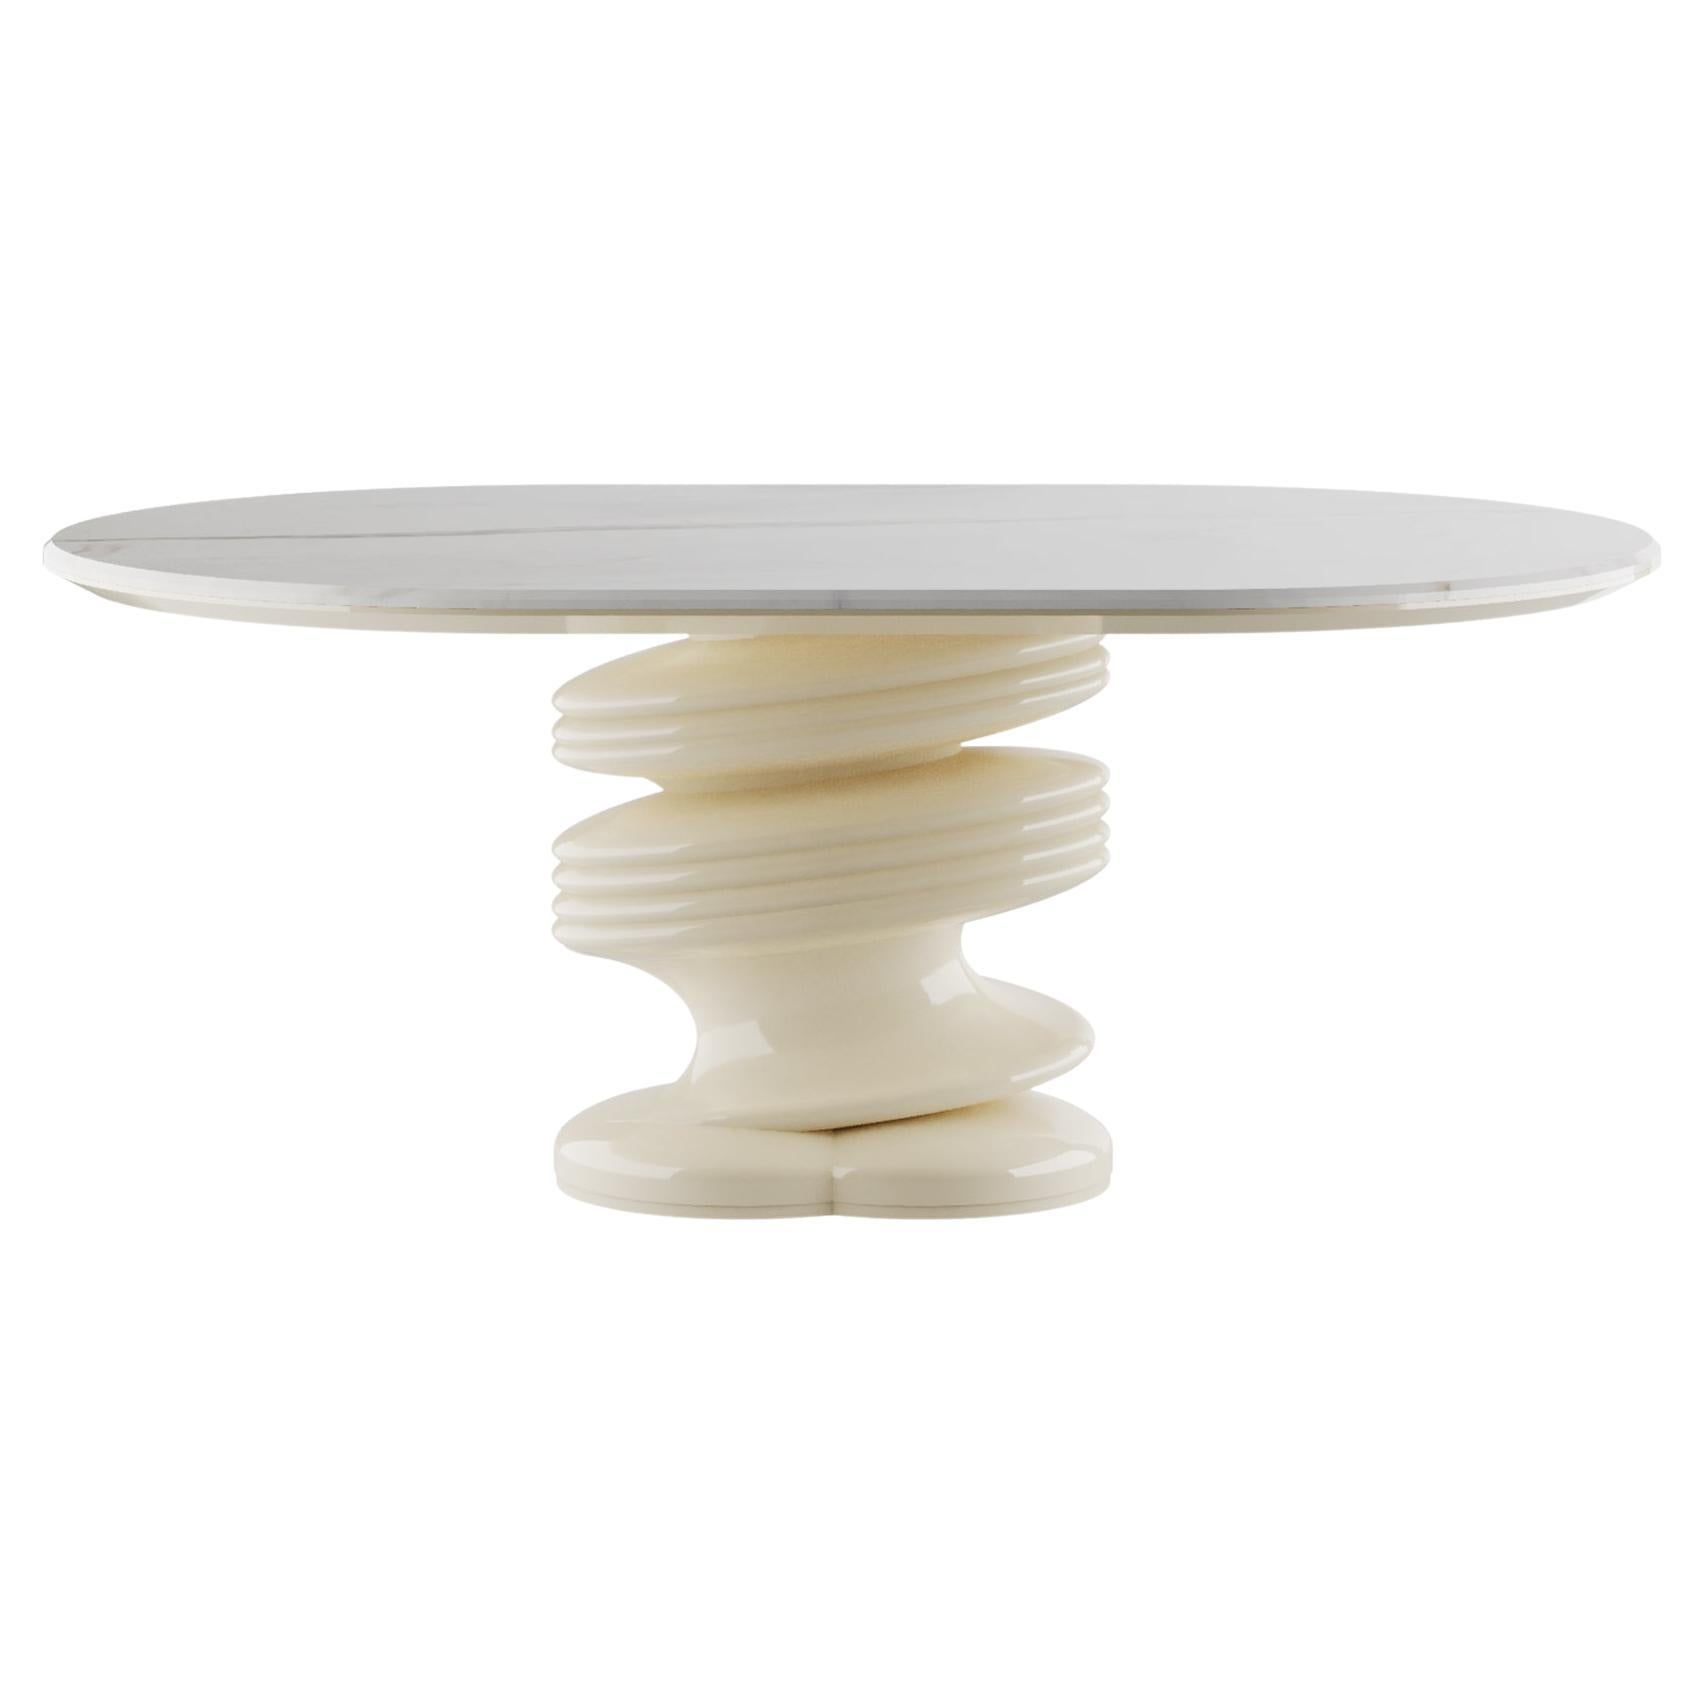 Modern White Marble Dining Table with a Fun Twist Sculptural Base Polished Brass